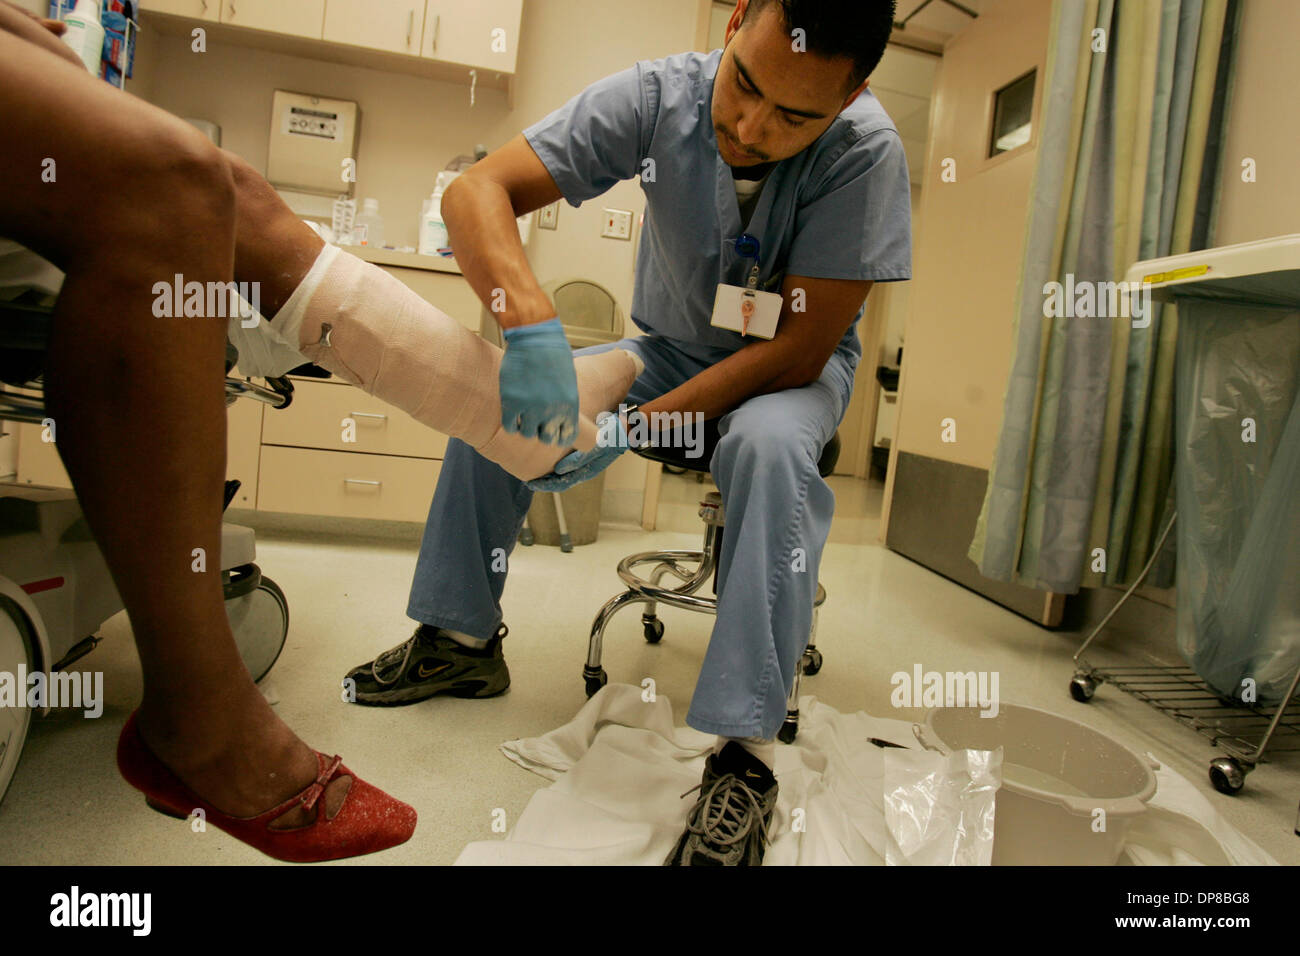 (Published 6/6/2006, A-1) June 5, 2006, San Diego, CA. USA. FRANCISCO RIVERA, Trauma Technician at UCSD Medical Center in Hillcrest wraps a broken foot in the emergency room Monday afternoon. Starting July 1, Medi-Cal patients will be required to show proof of citizenship to enroll in the program. Documents include passports, birth certificates and citizenship certificates. Some ex Stock Photo